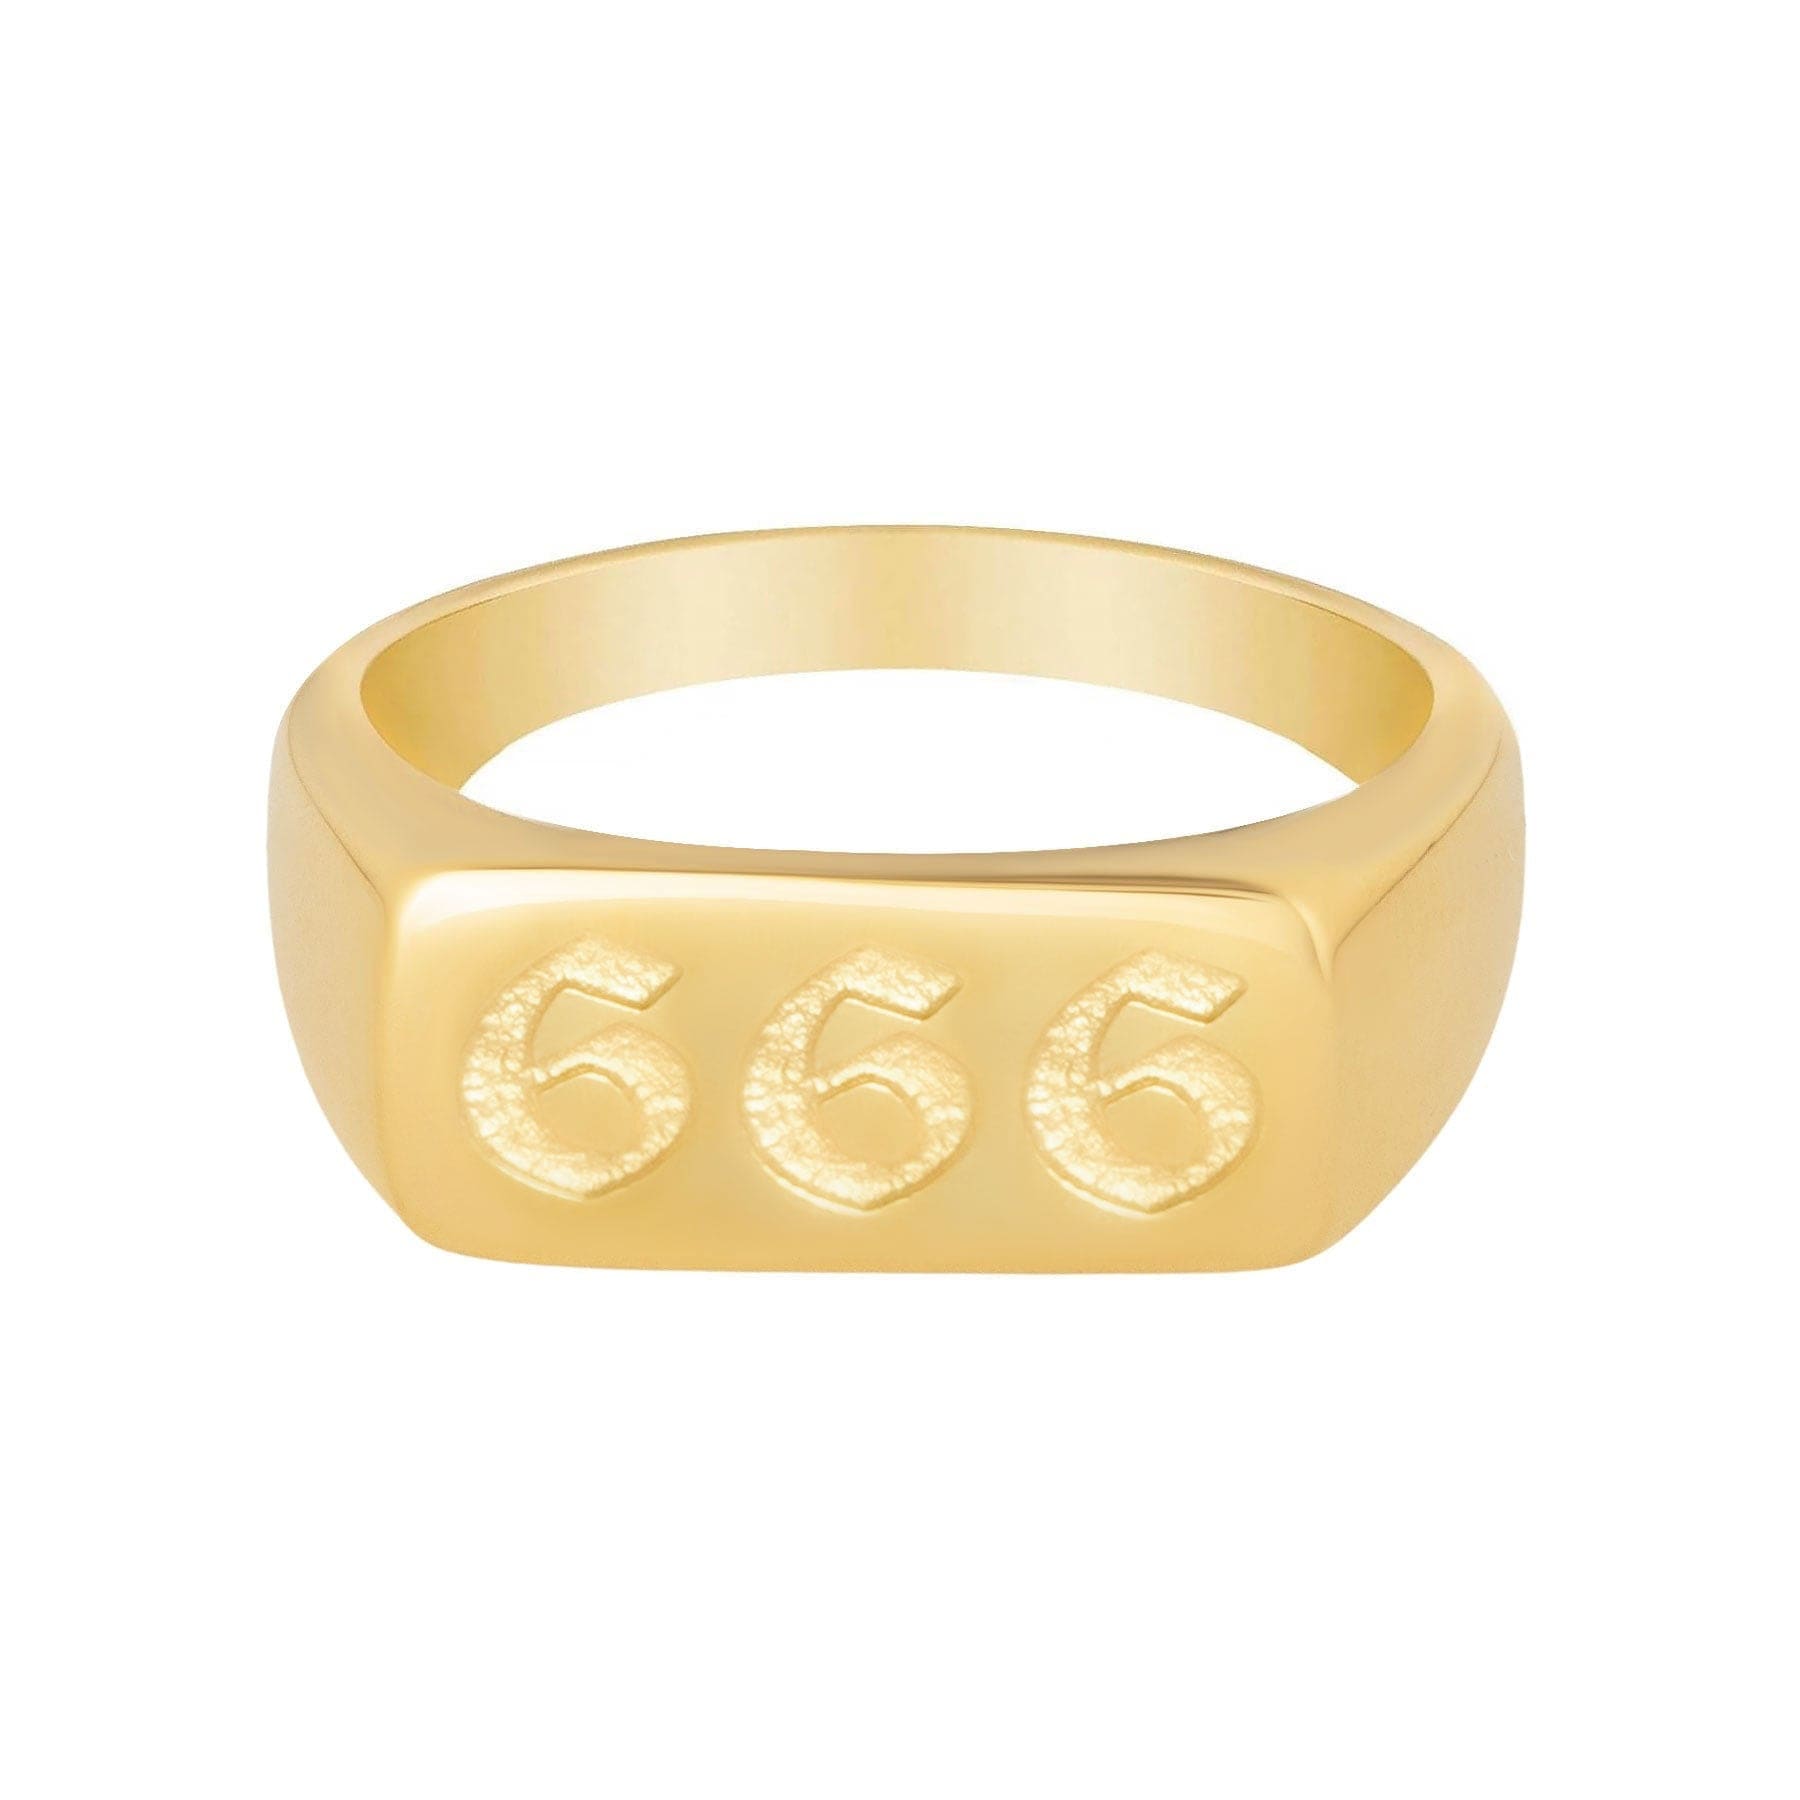 BohoMoon Stainless Steel Angel Numbers Ring Gold / 666 / US 6 / UK L / EUR 51 (small)